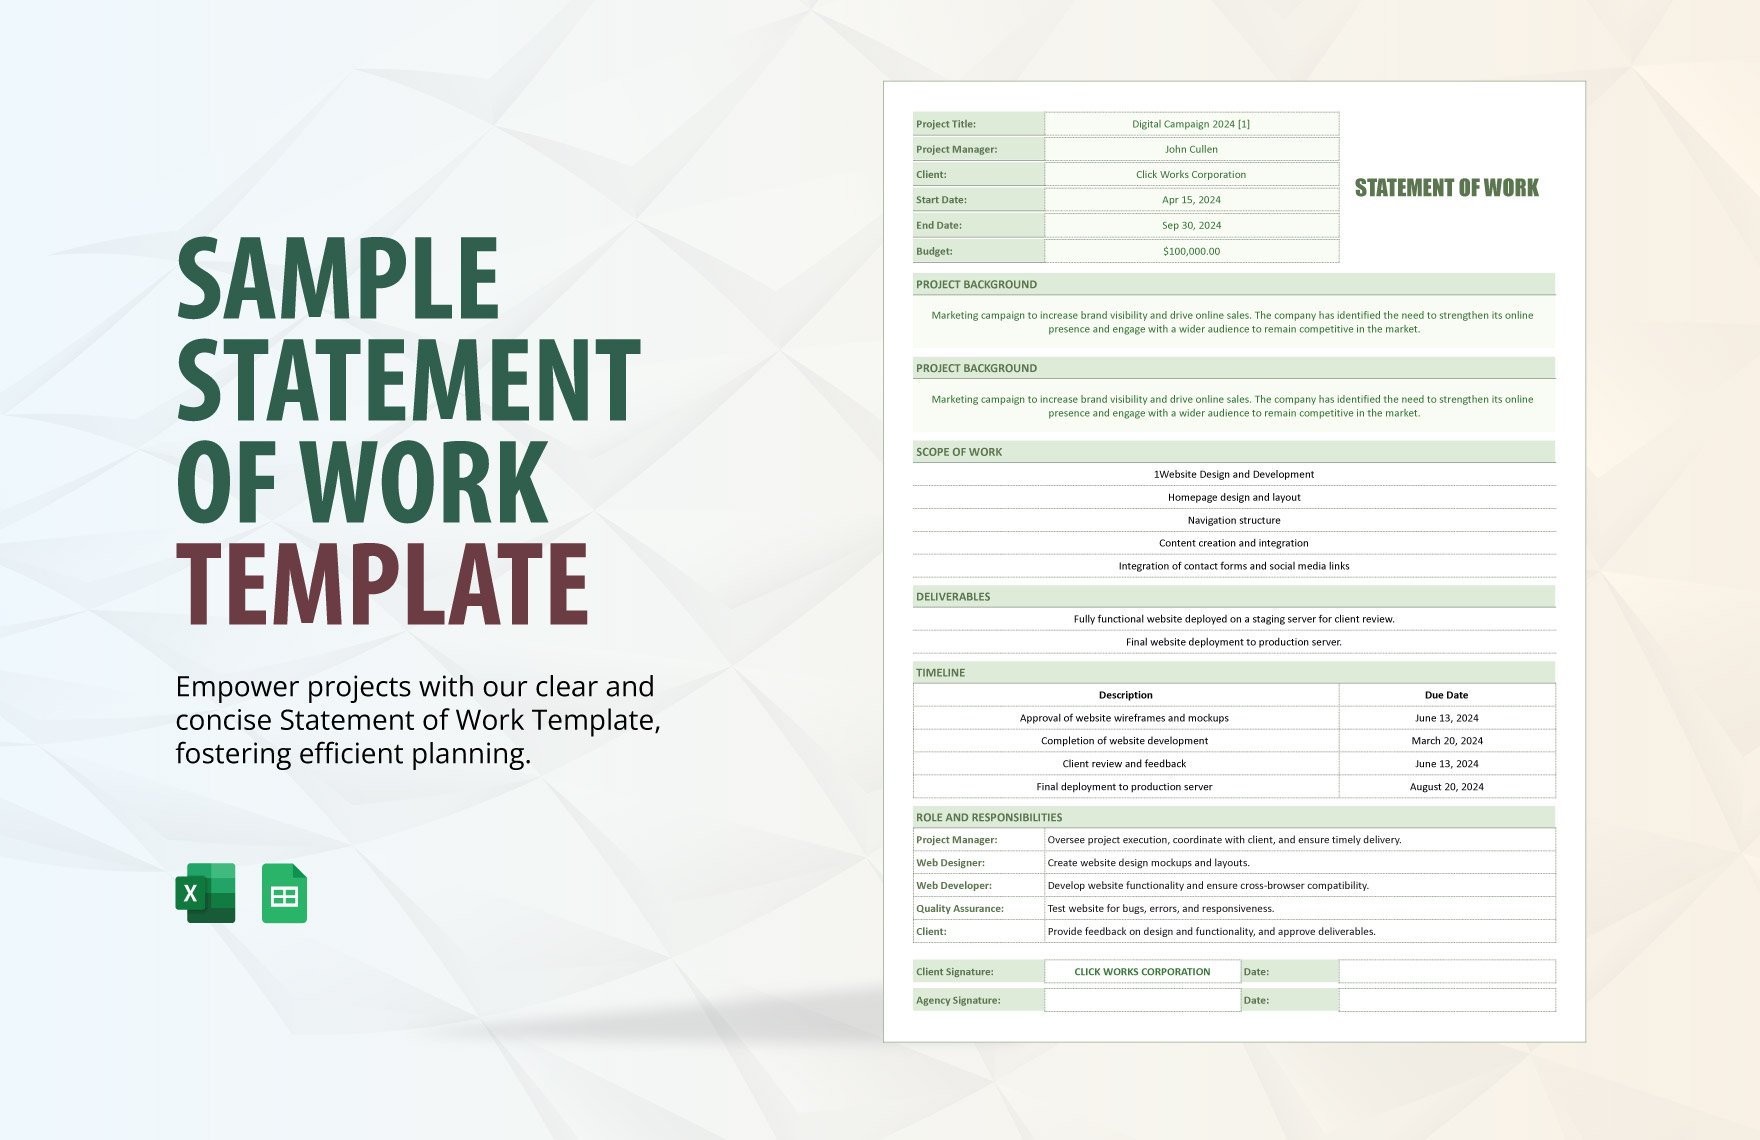 Sample Statement of Work Template in Excel, Google Sheets